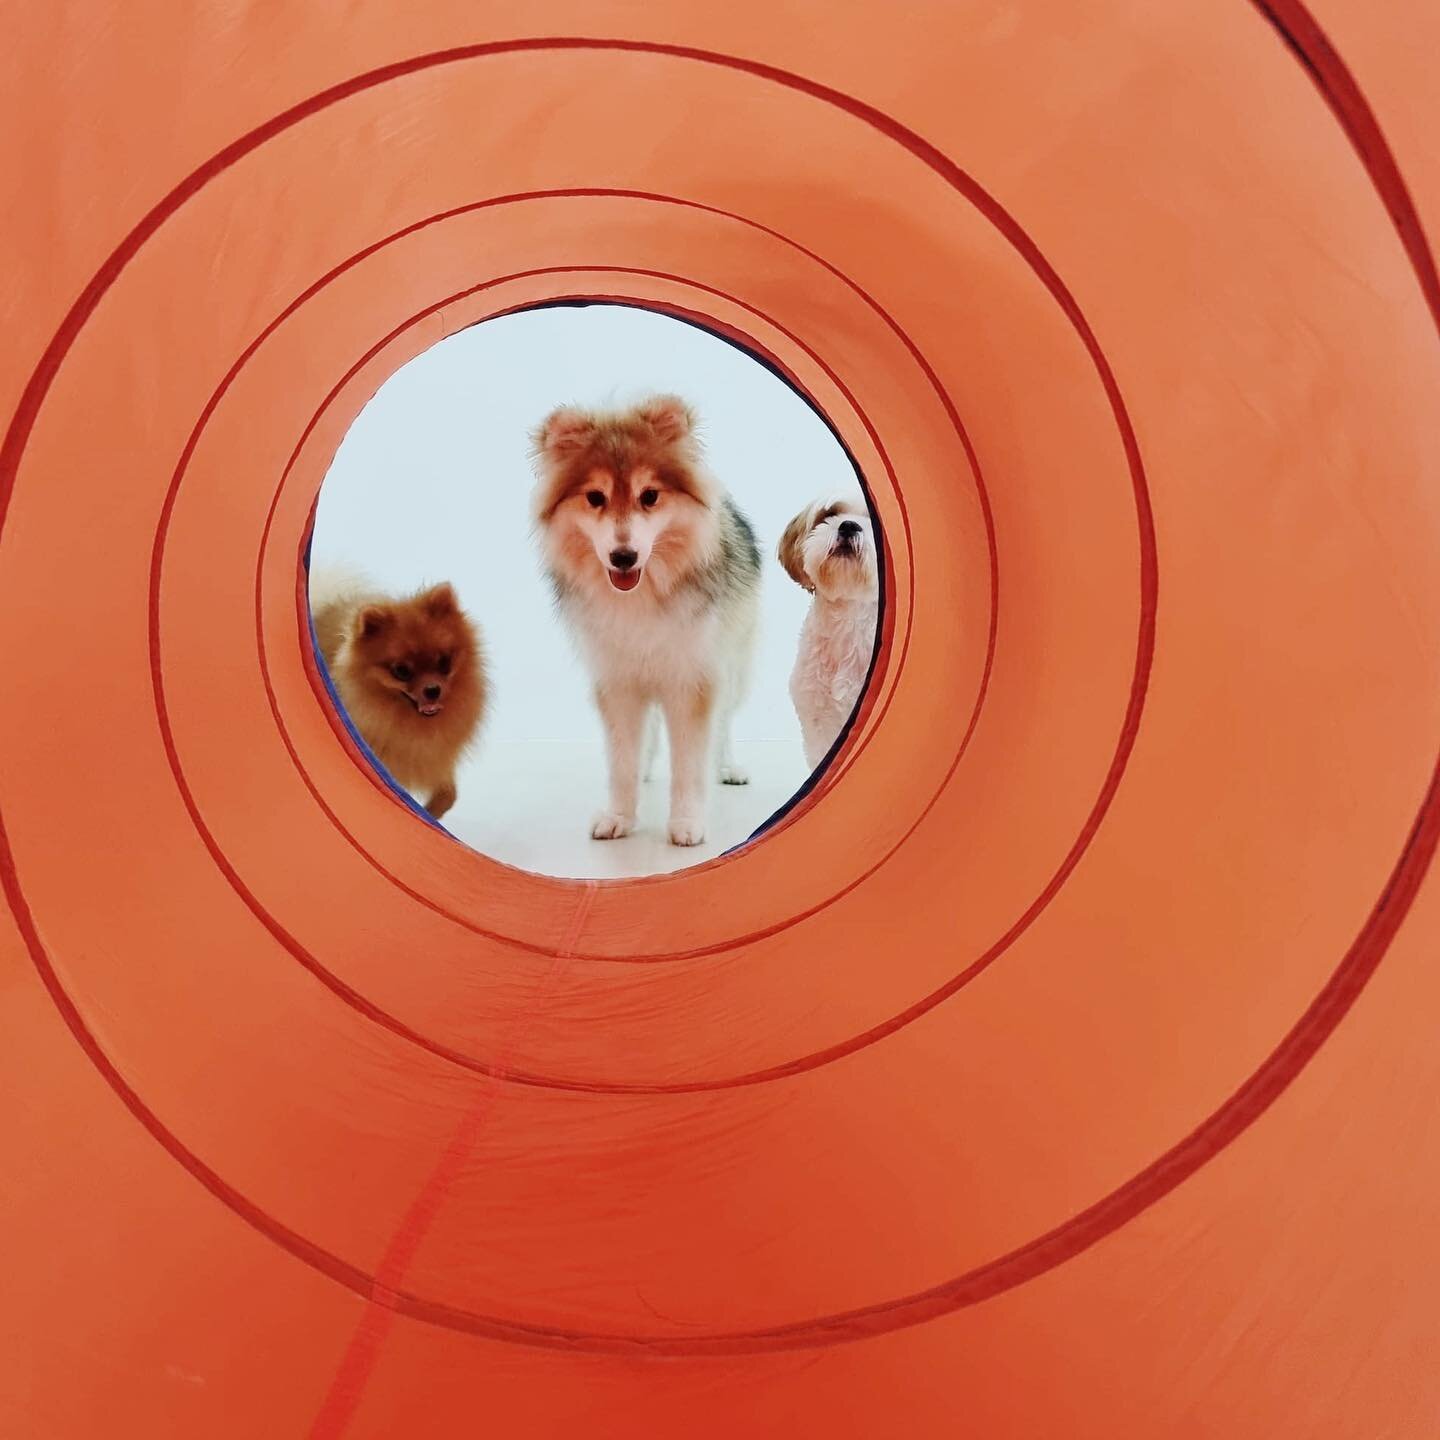 To enter or not to enter ⛔️ 

The tunnel is a fun obstacle for dogs to navigate but going through the narrow space can be too terrifying for some. 

Allowing them to explore and learn at their own pace (and of course with some support from yummy trea